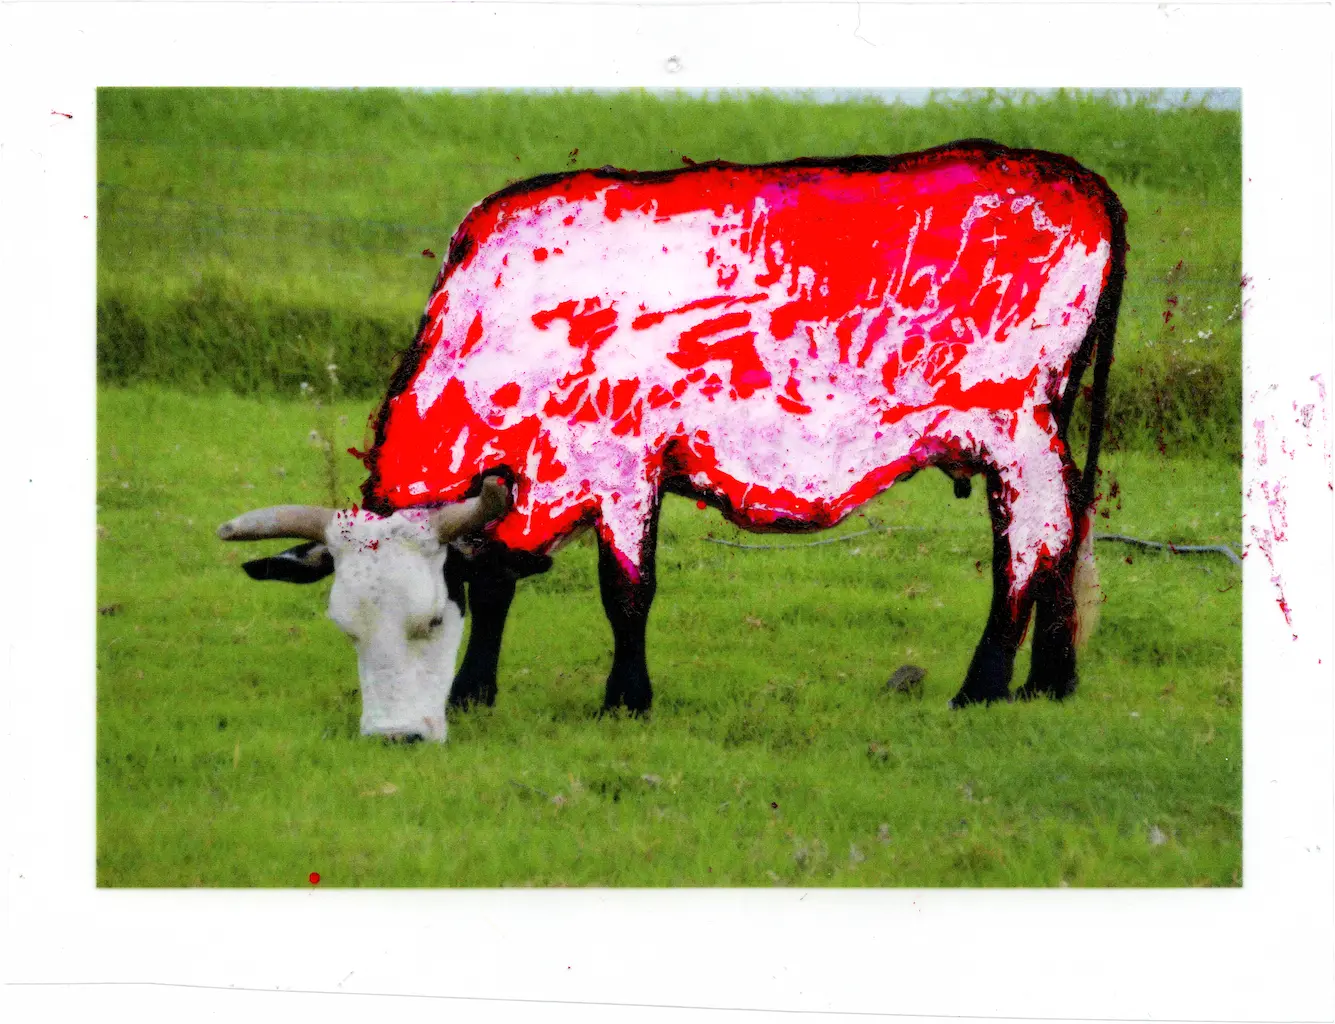 An image of a grazing cow printed on acetate has been viciously attacked with the sharp flat nib of a calligraphic pen. The red ink from the pen has replaced most of the cow’s hide, and the violent abrasion of the metallic “weapon” has left scars and tears in the bloody mess.